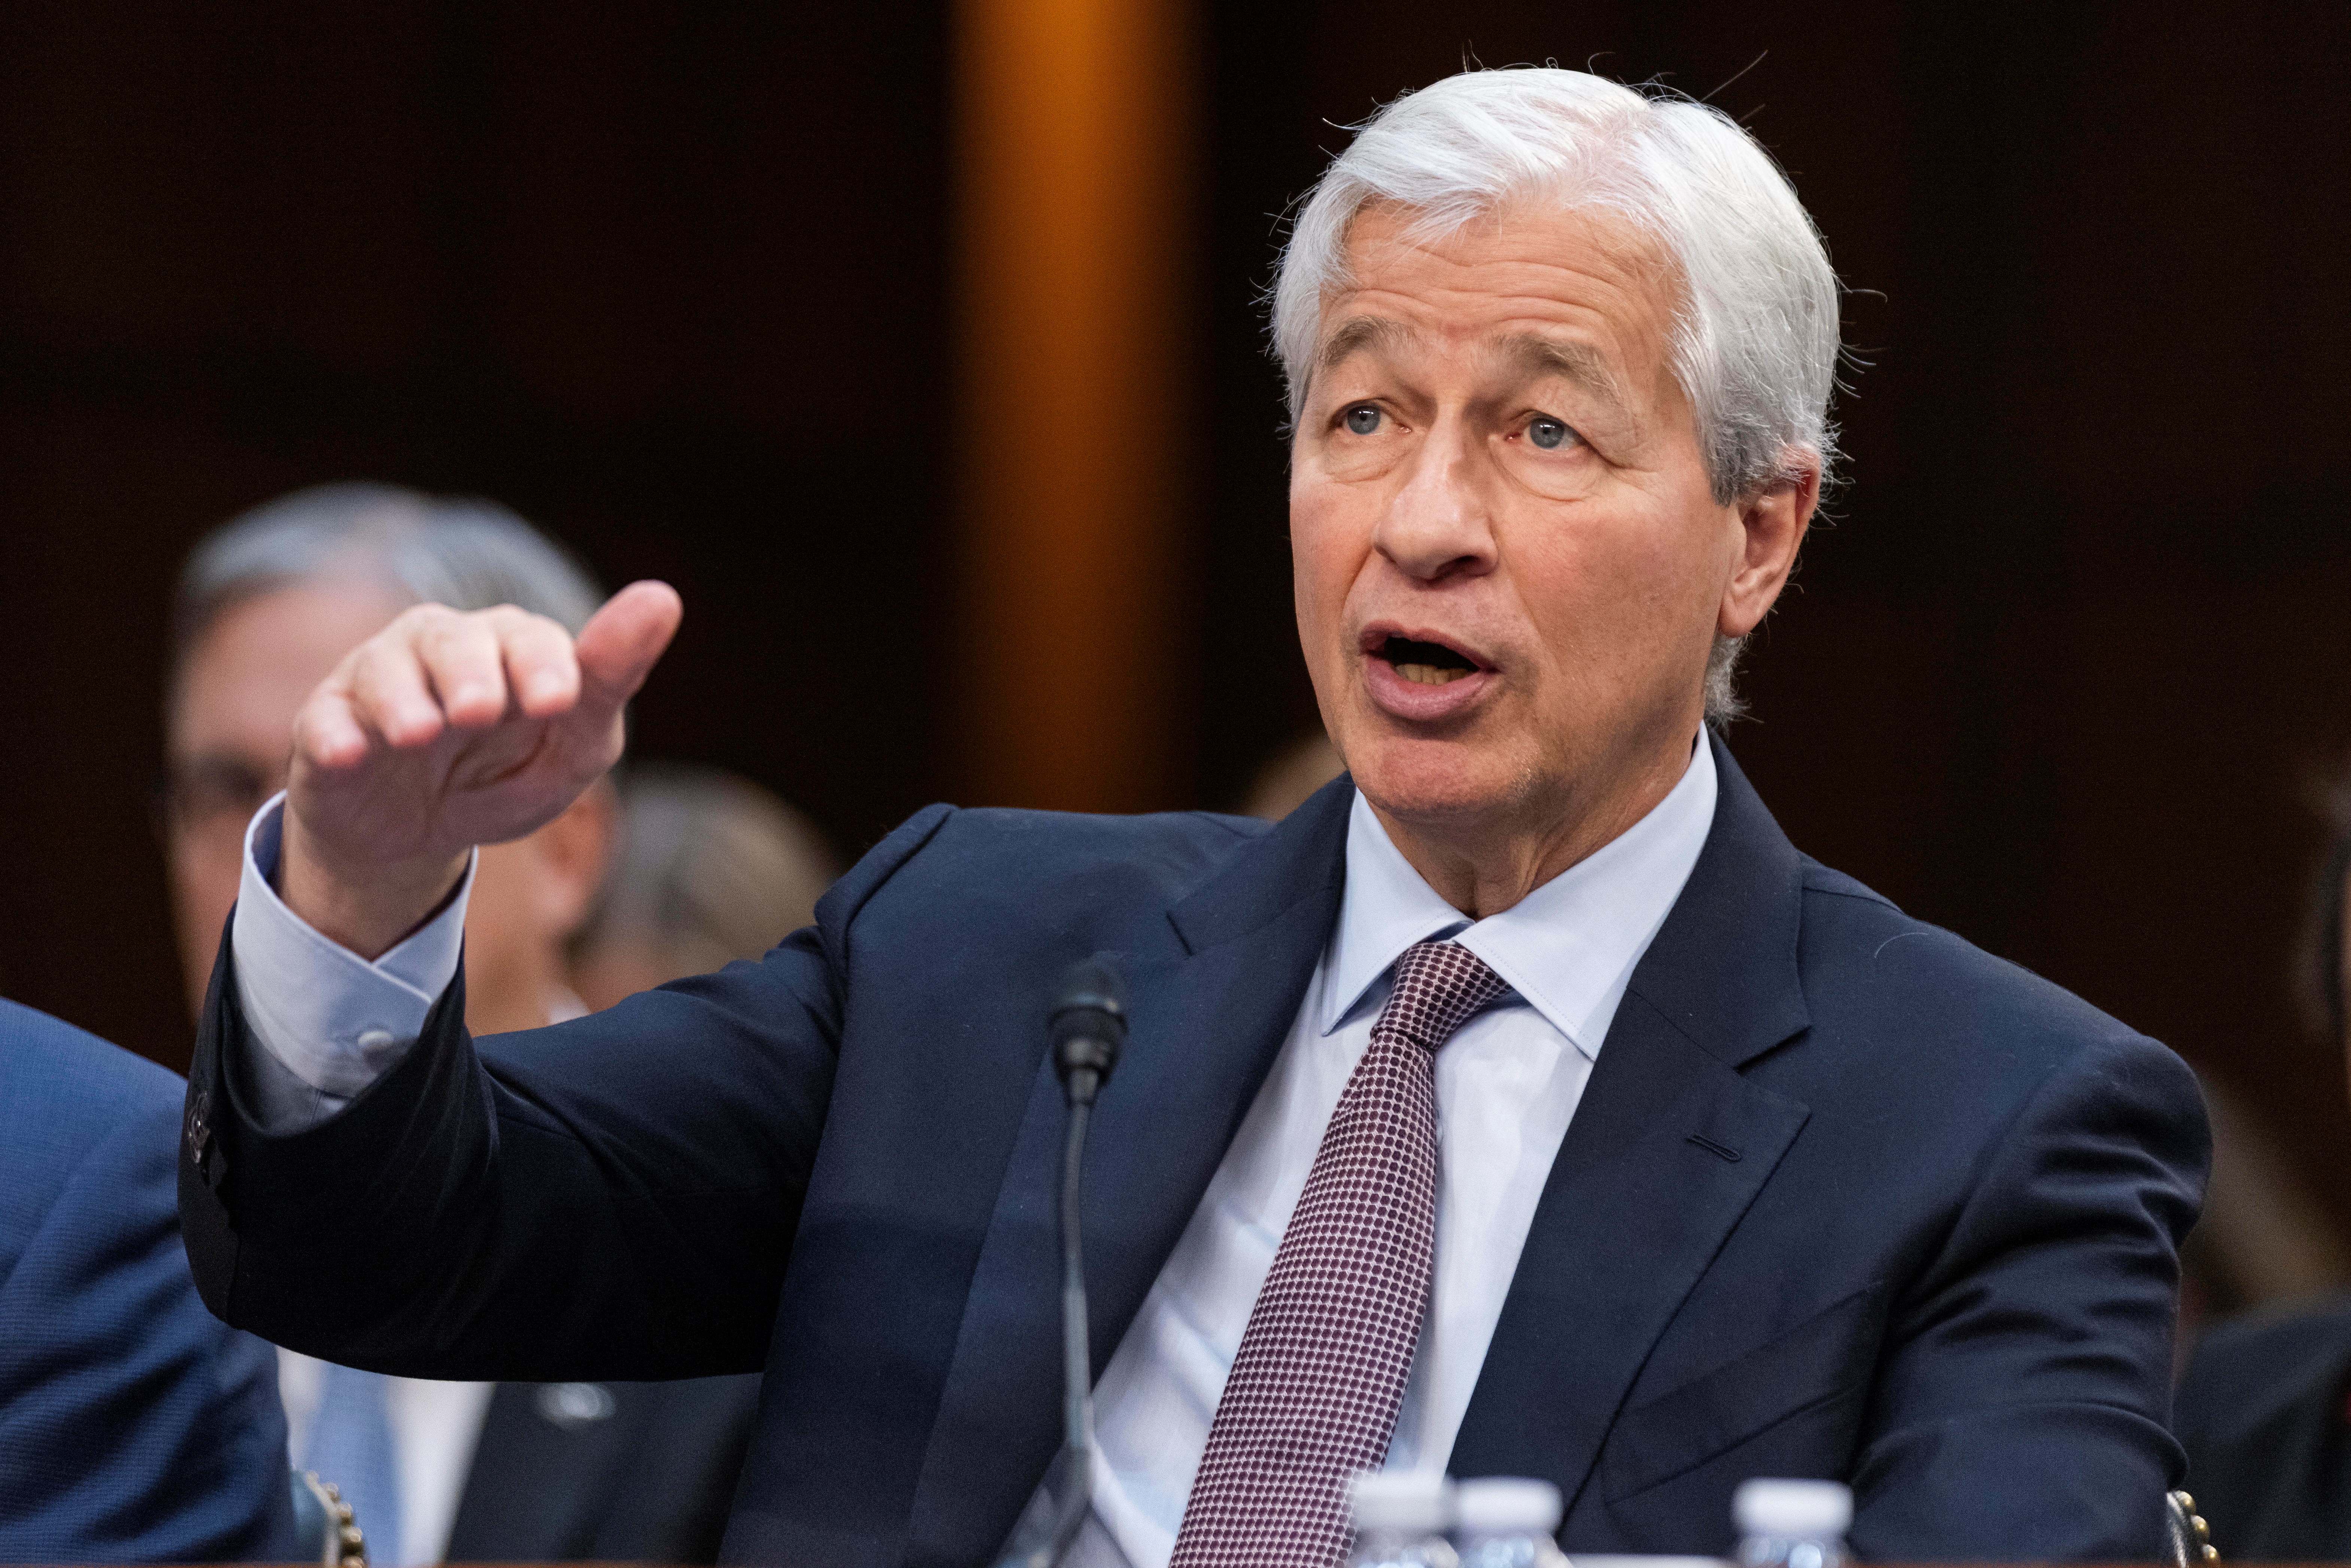 JPMorgan’s 2Q profits surge 25% thanks to one-time gain and Wall Street revival